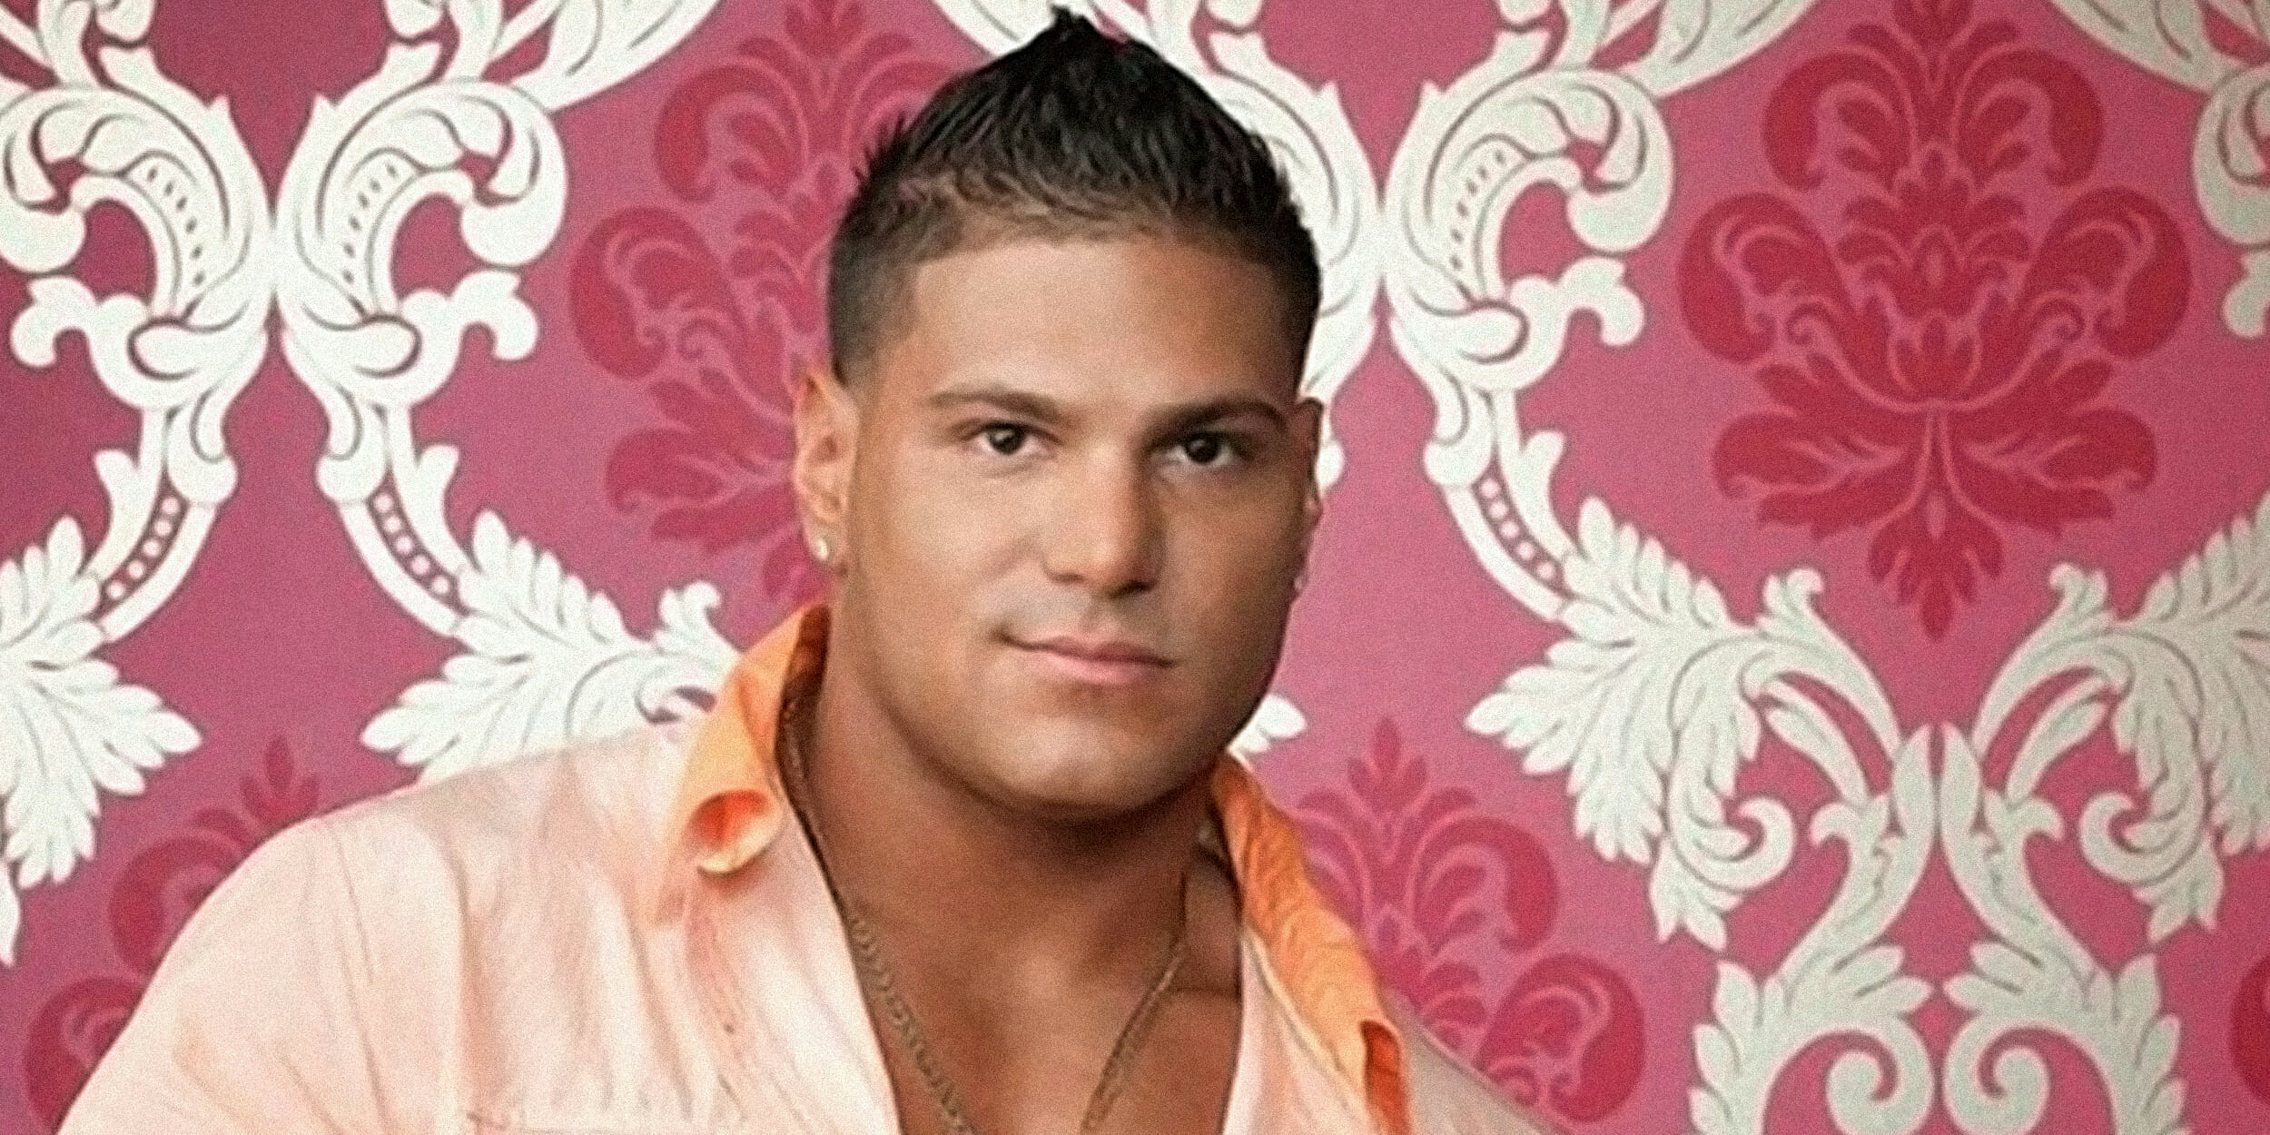 Ronnie from Jersey Shore